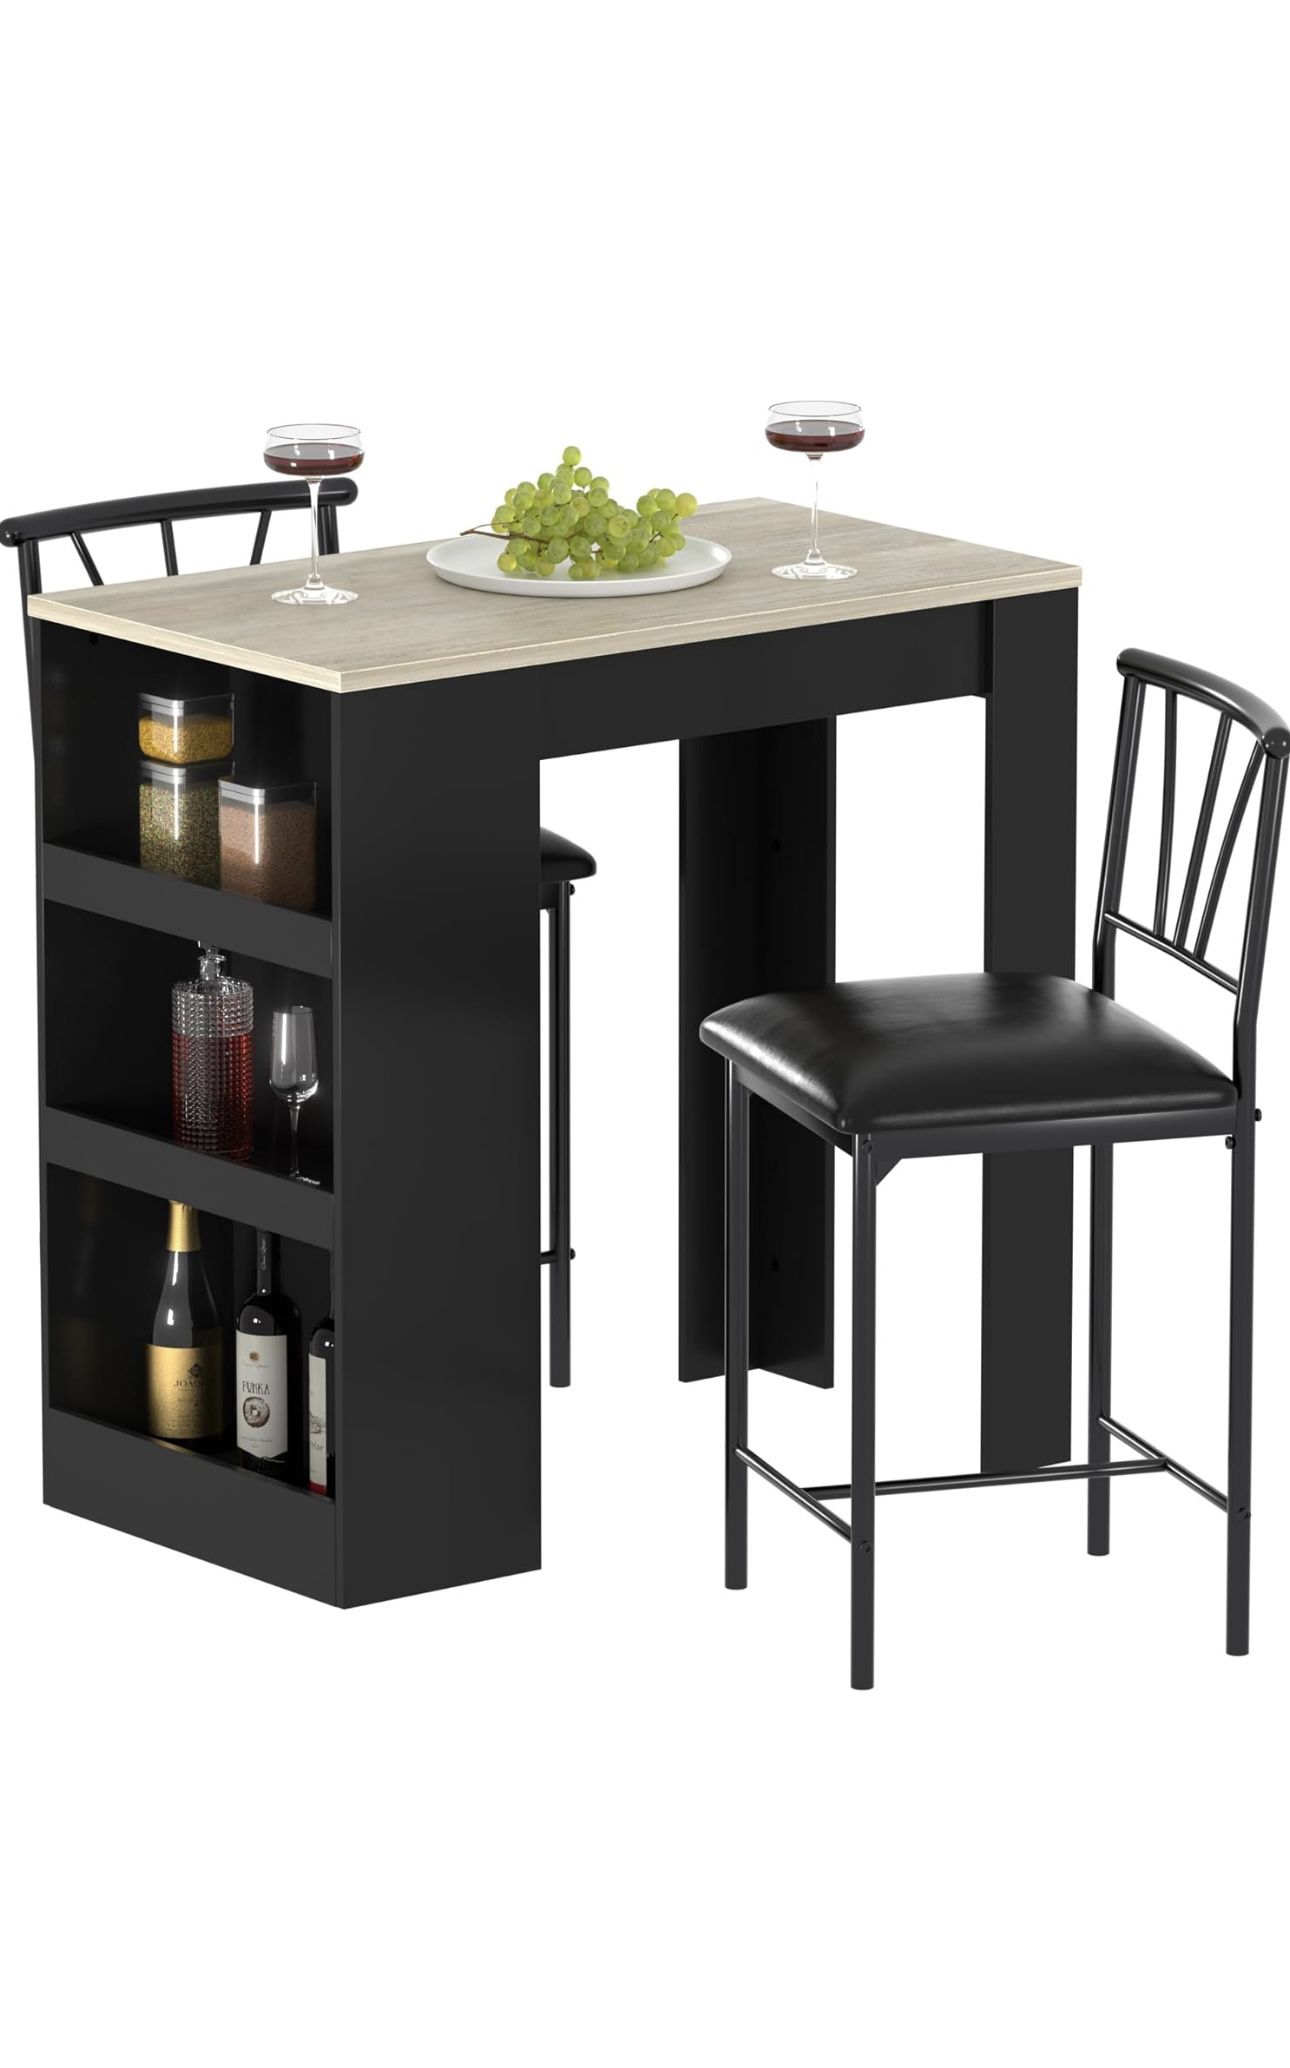 Small Bar Table and Chairs Tall Kitchen Breakfast Nook with Stools/Dining Set for 2